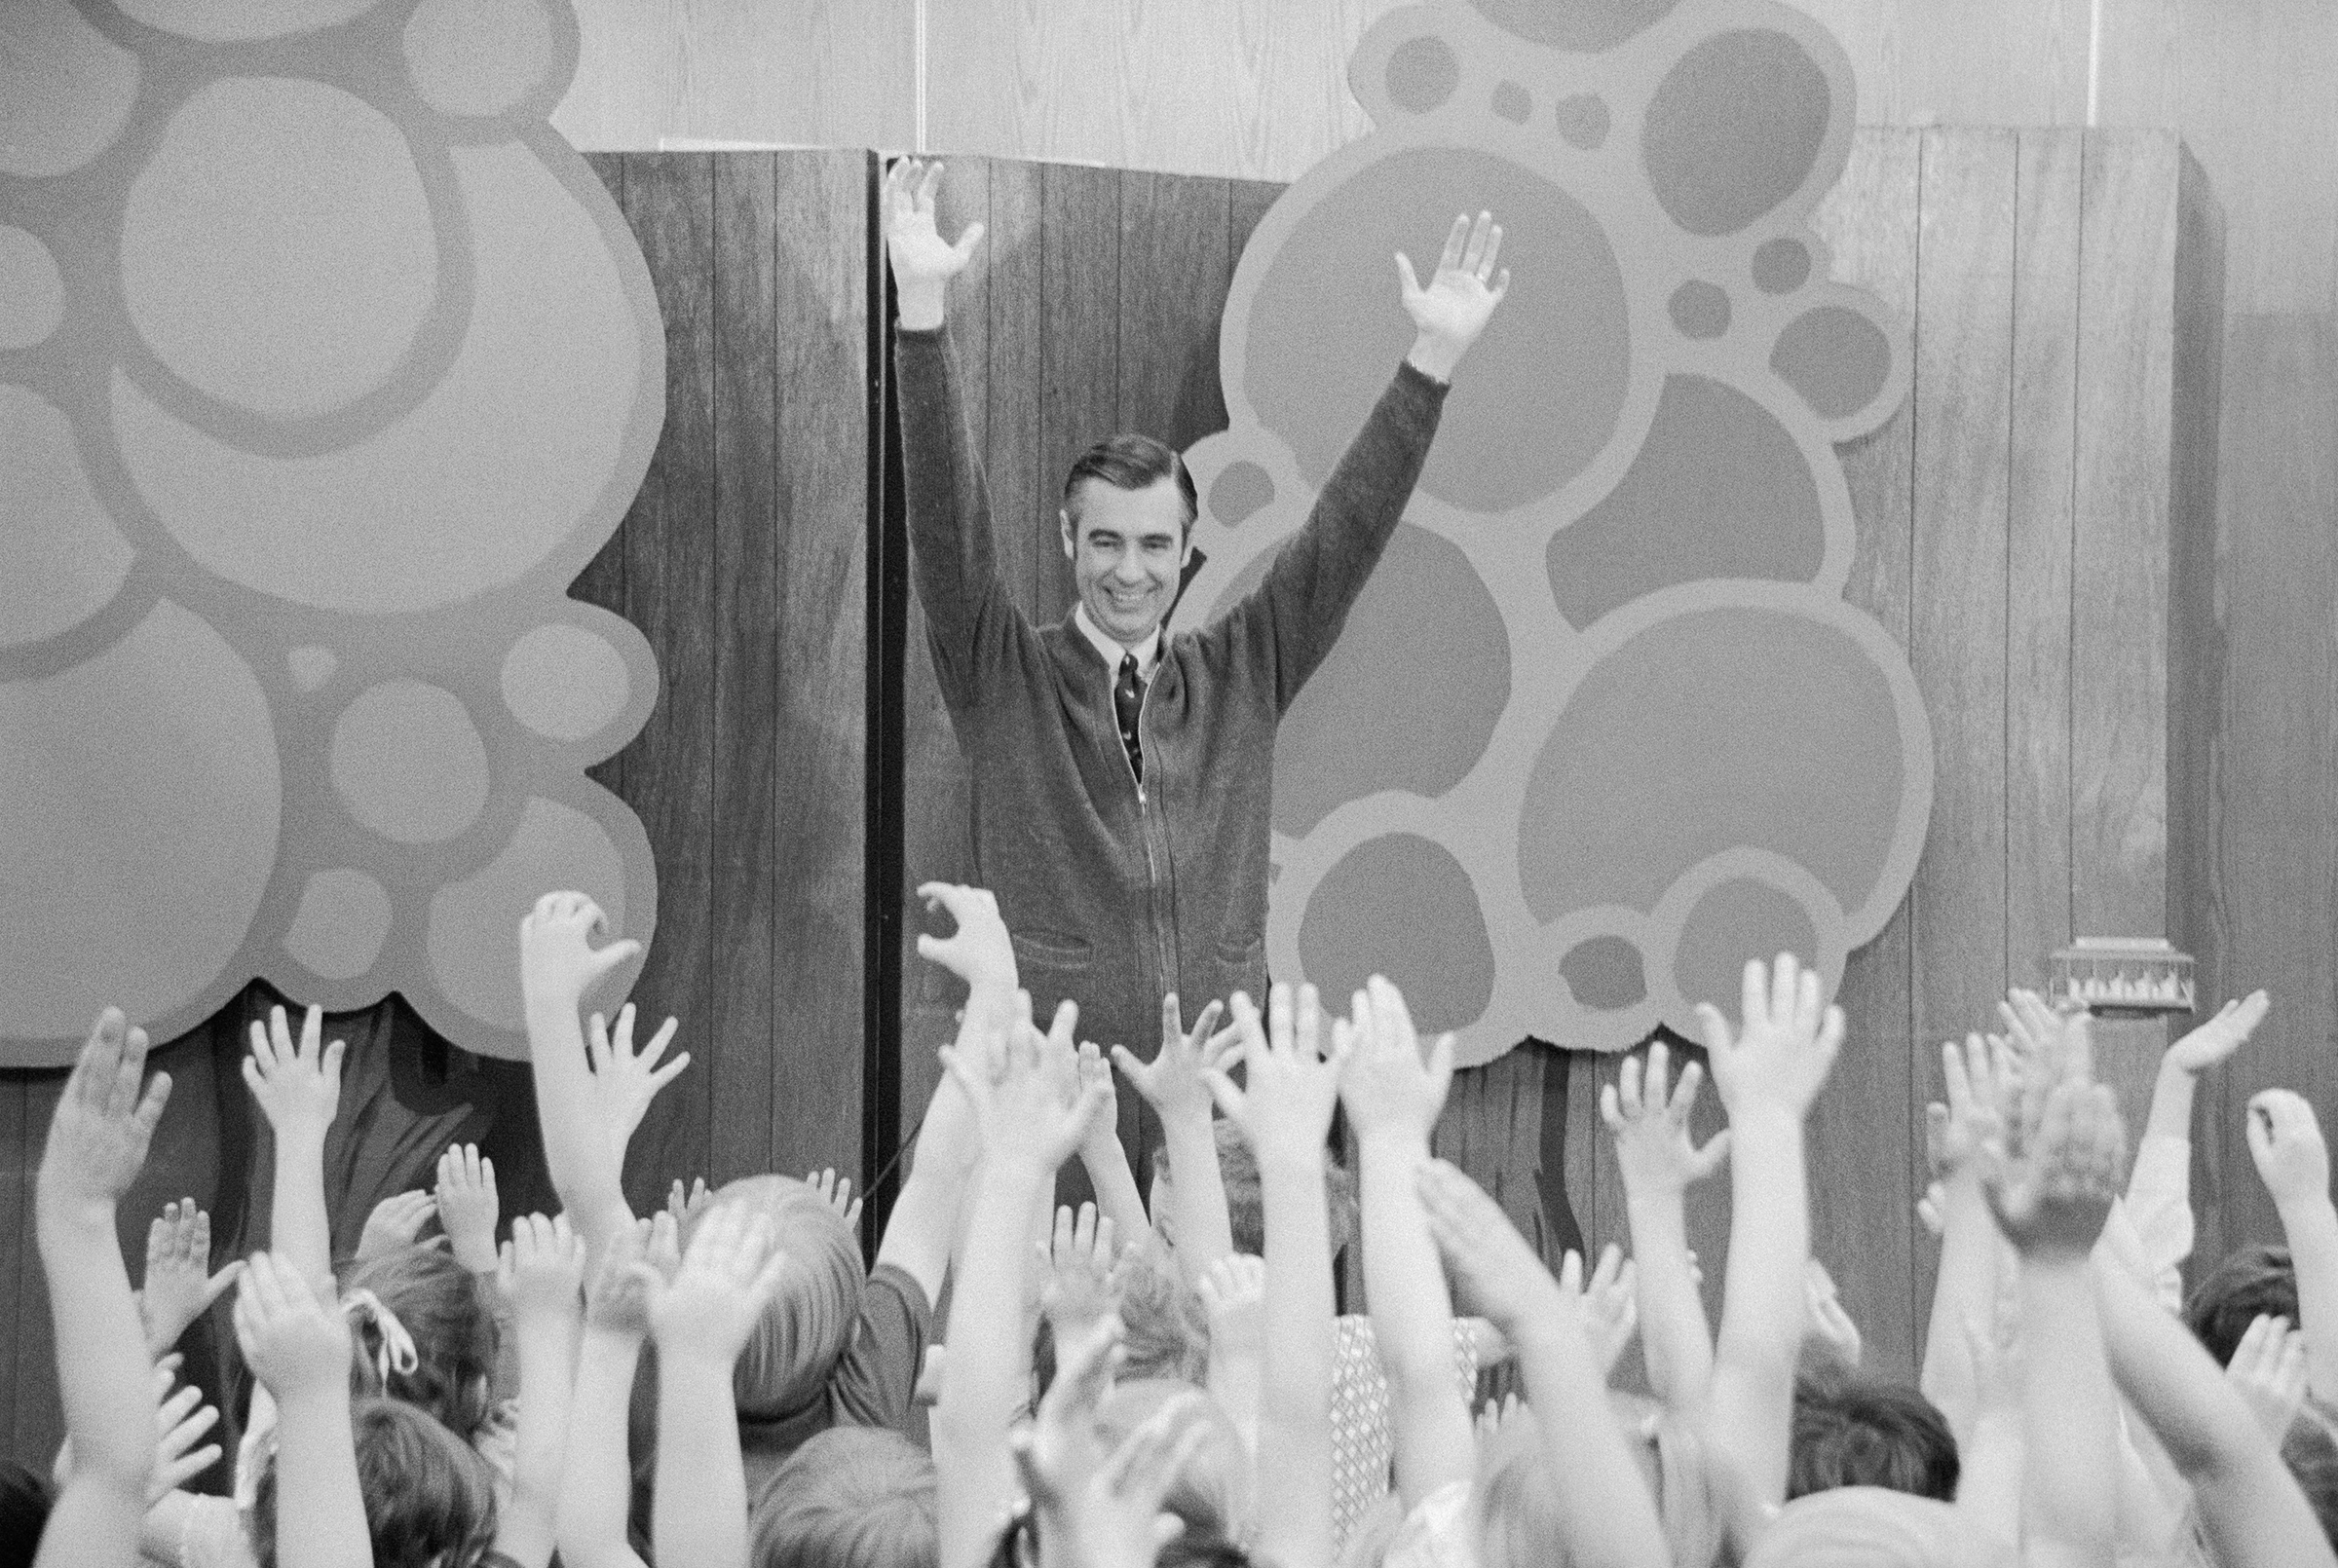 Fred Rogers of "Mister Rogers' Neighborhood" entertains children during a Mister Rogers' Day celebration. Several thousand children from the surrounding states attended the event held at the University of South Dakota on May 26, 1973 (Bettmann Archive/Getty Images)